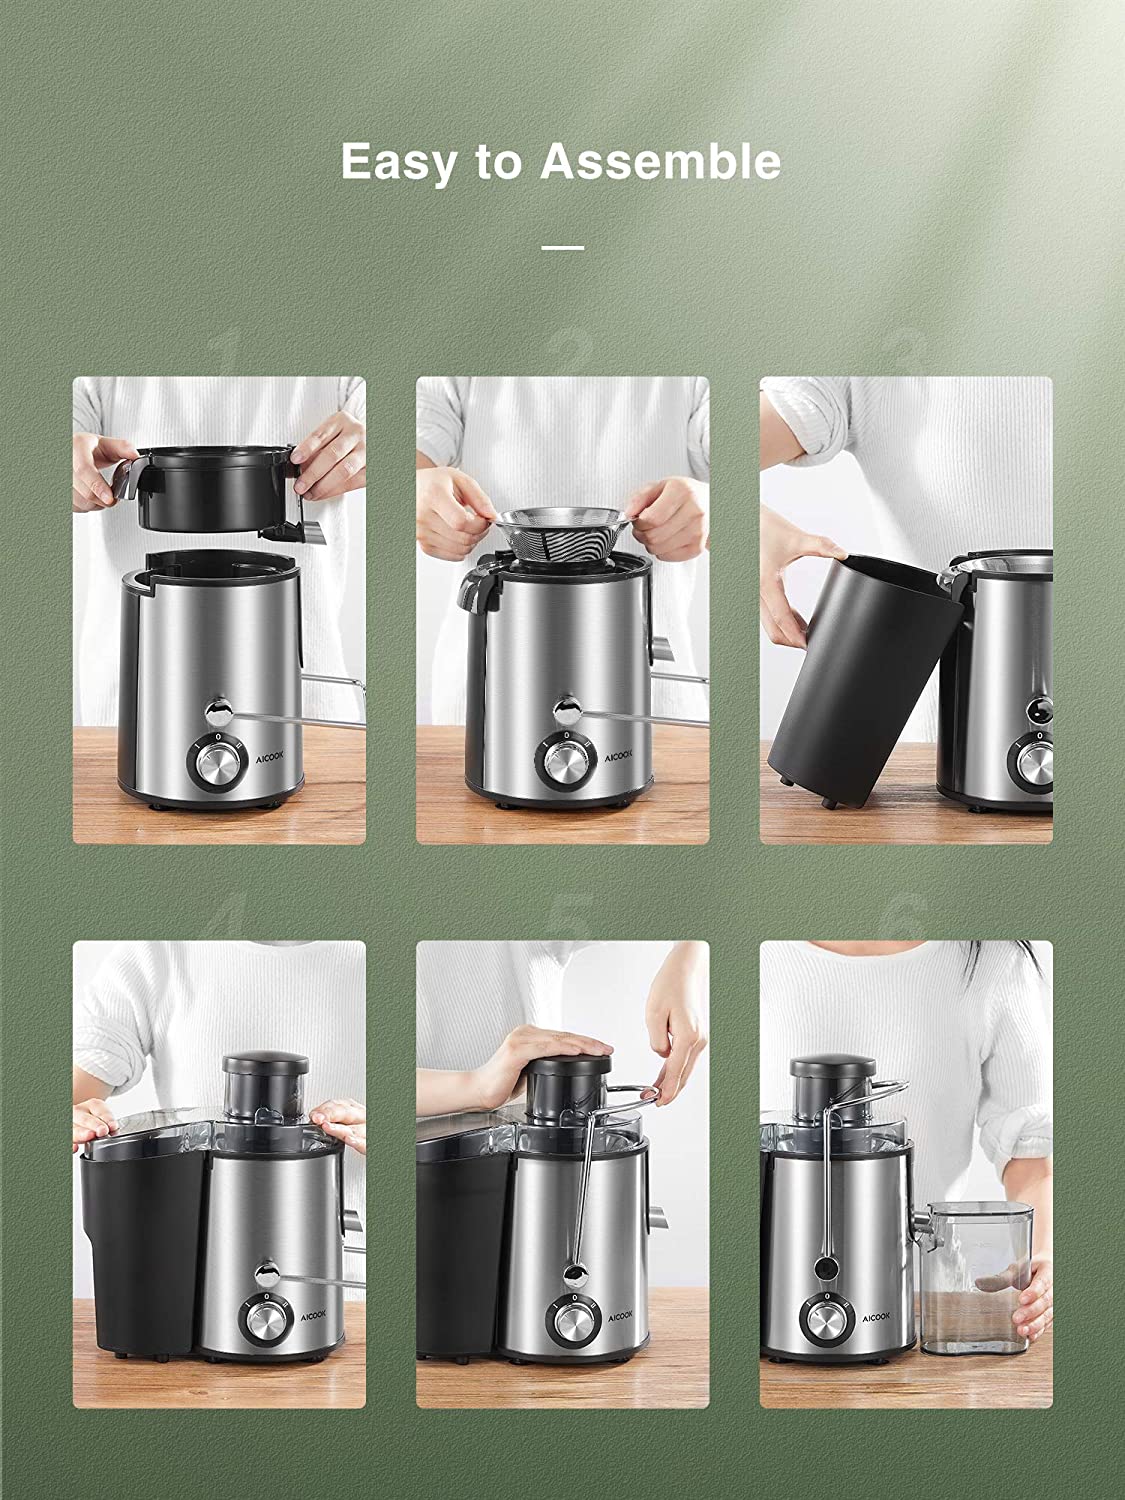 Aicook | Centrifugal Juicer Machine, Juice Extractor, 3''Wide Mouth Juicer with 2 Speeds for Fruits and Vegs, Anti-drip, Stainless Steel & BPA Free, Easy To Assemble